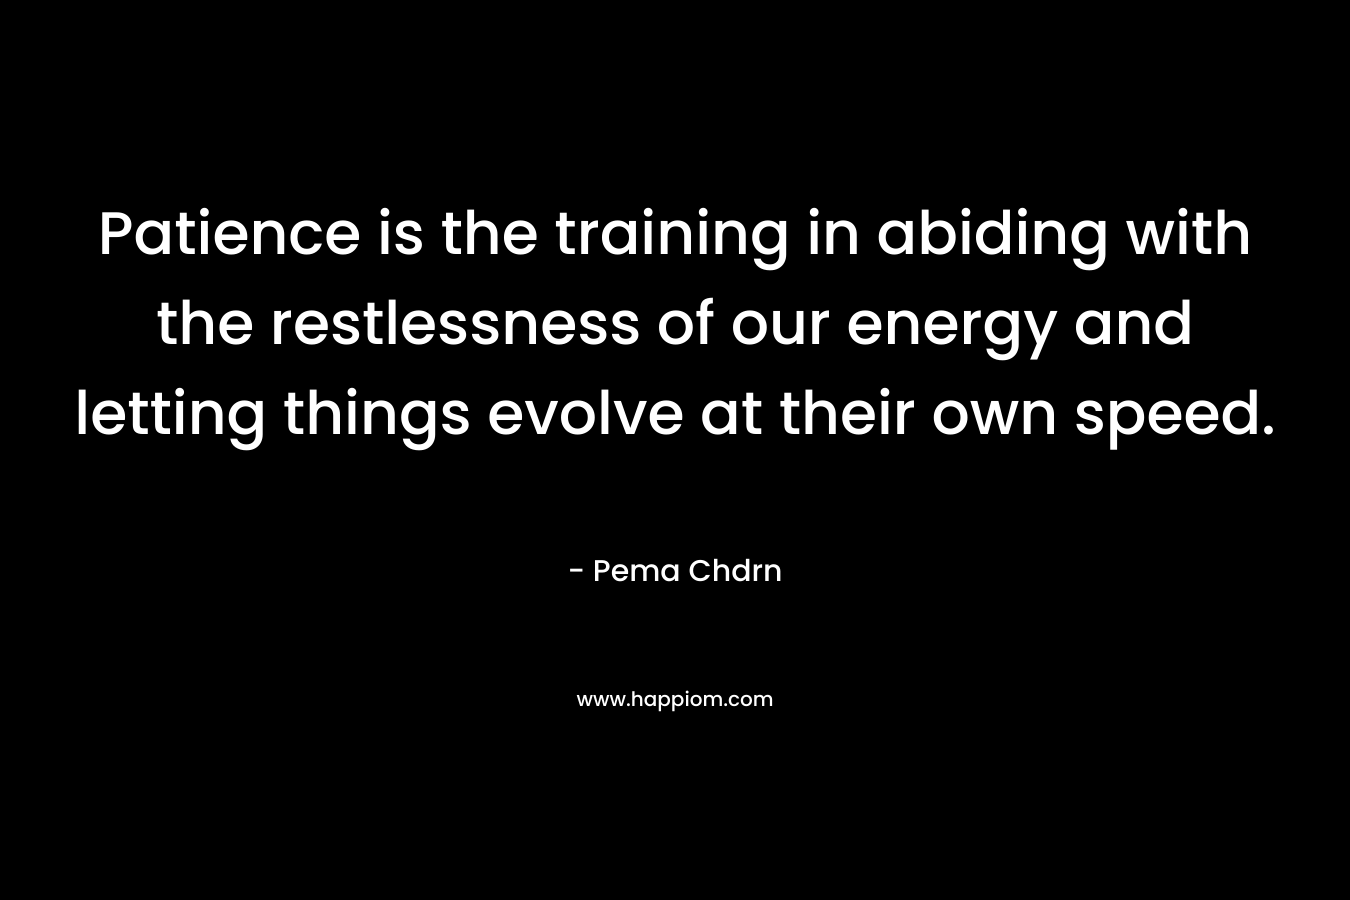 Patience is the training in abiding with the restlessness of our energy and letting things evolve at their own speed.